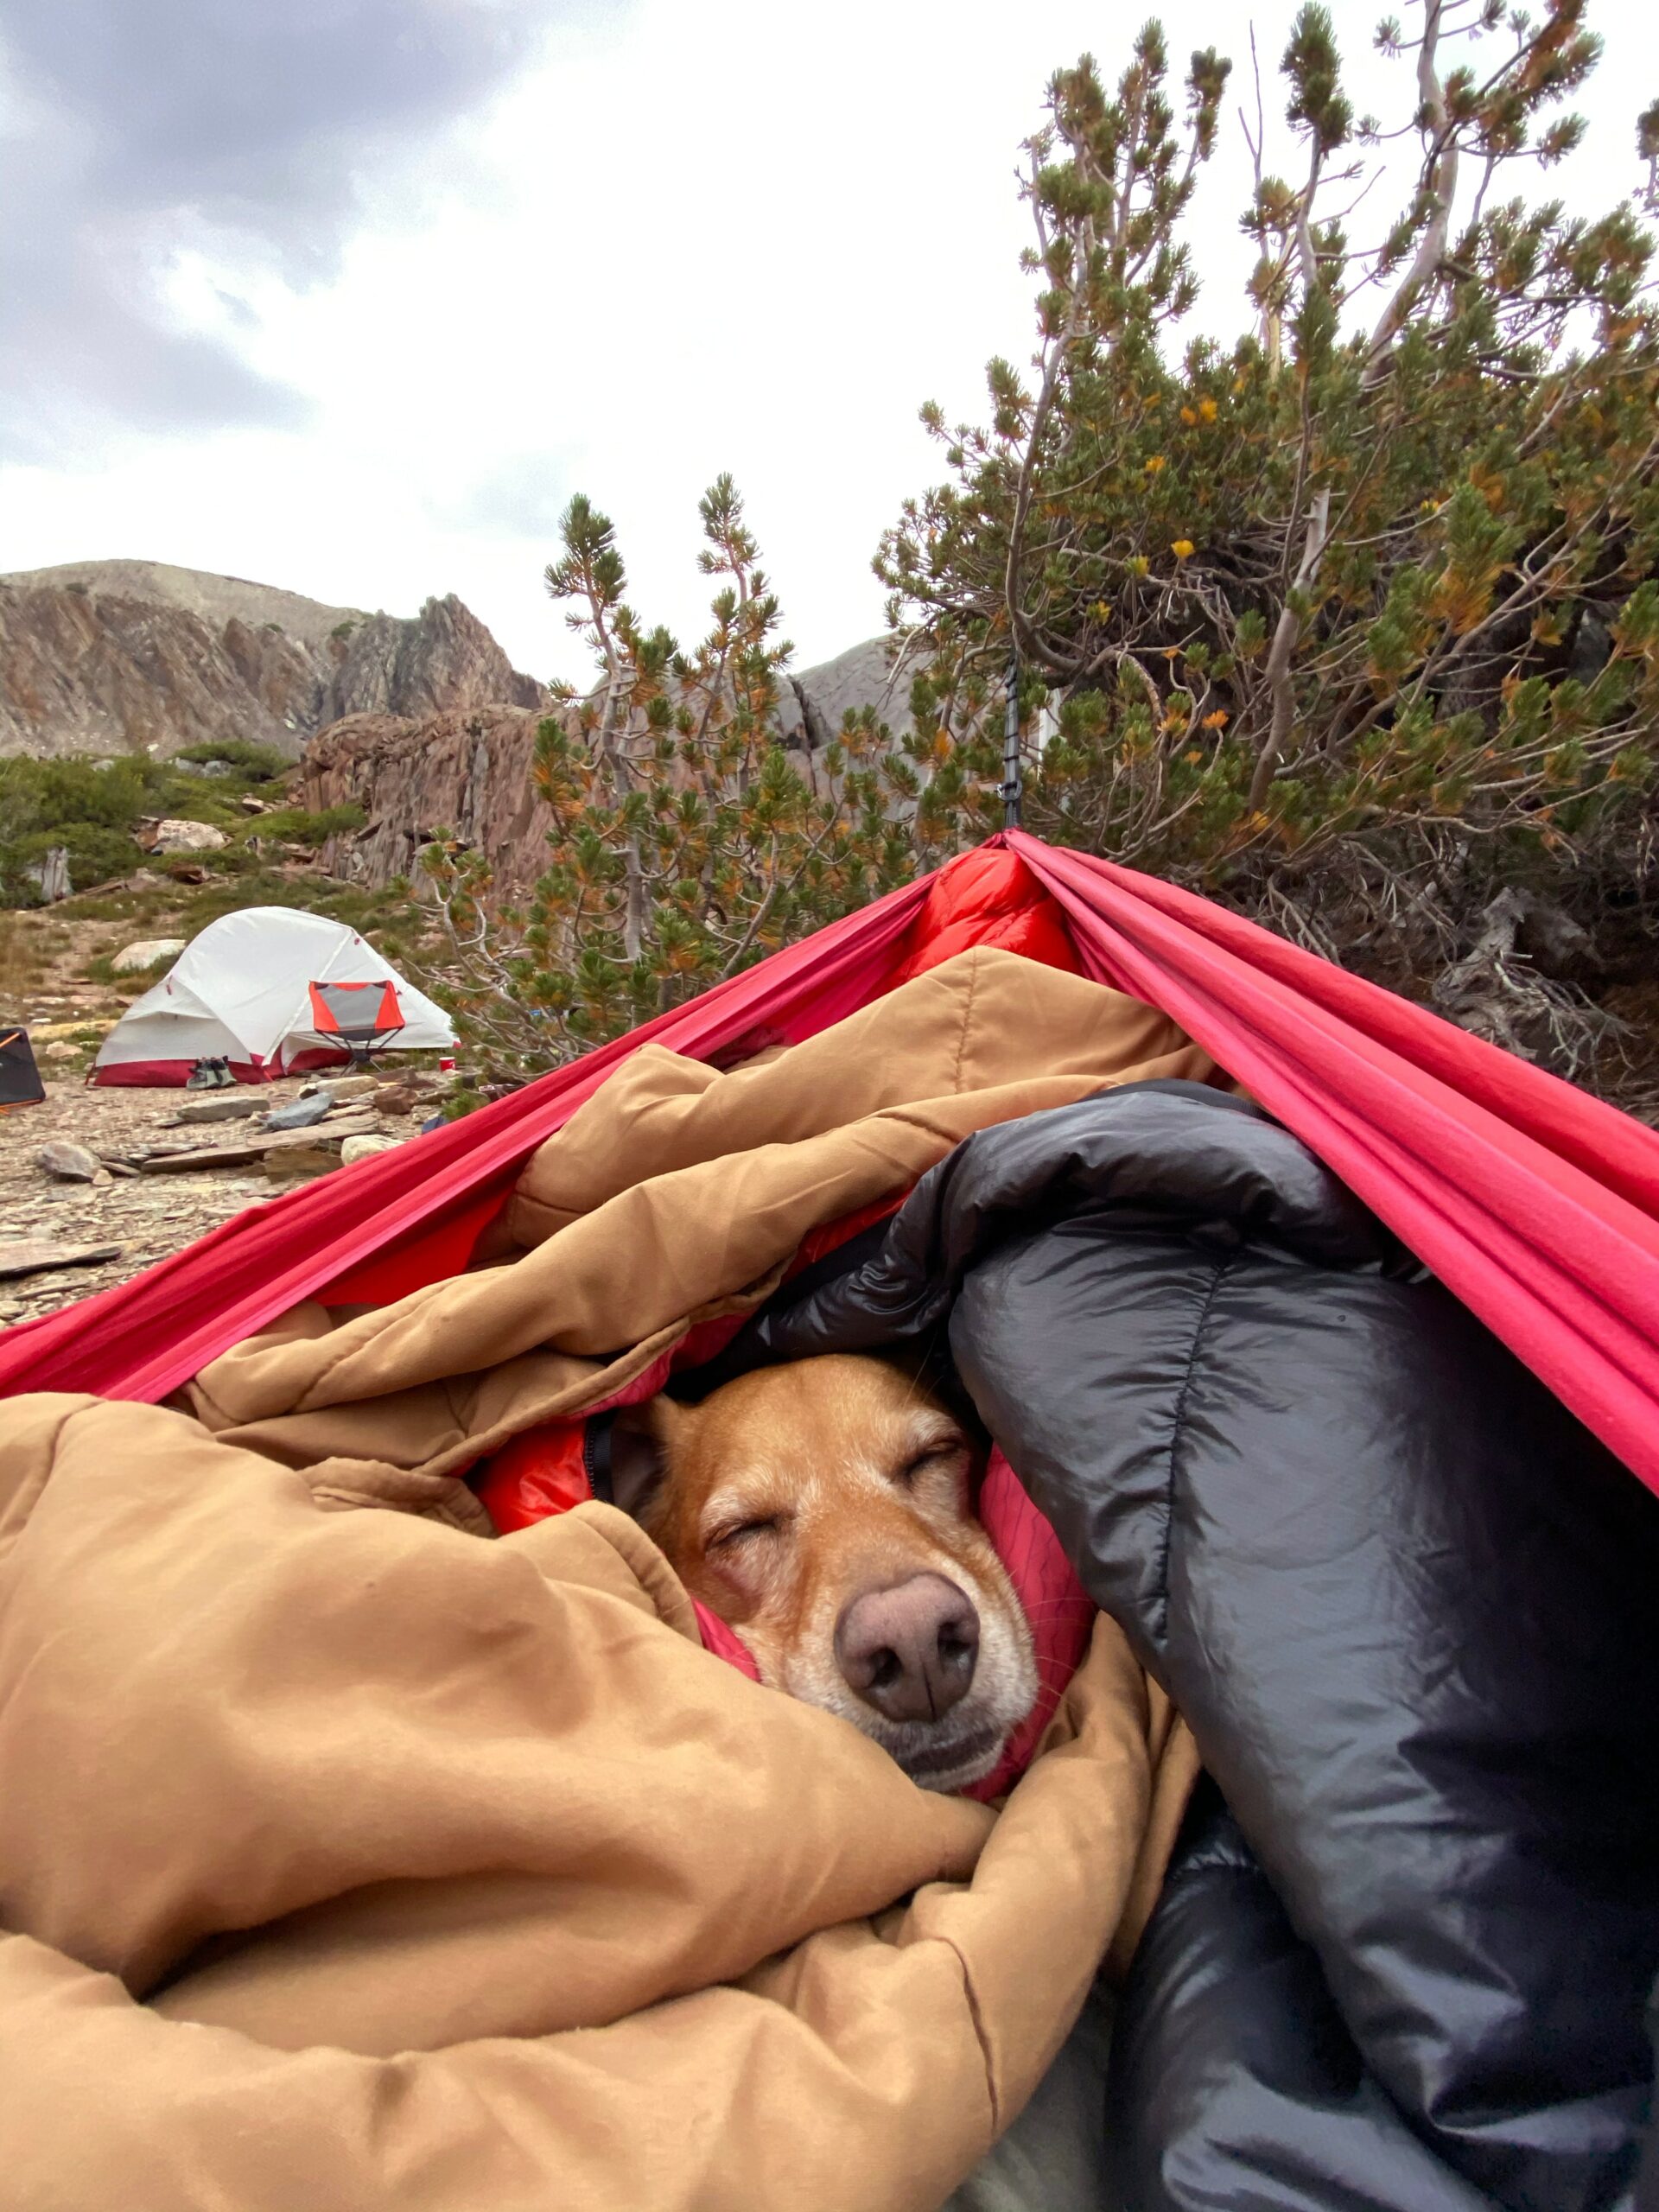 Fun Trip Ideas Both You and Your Dog Will Love